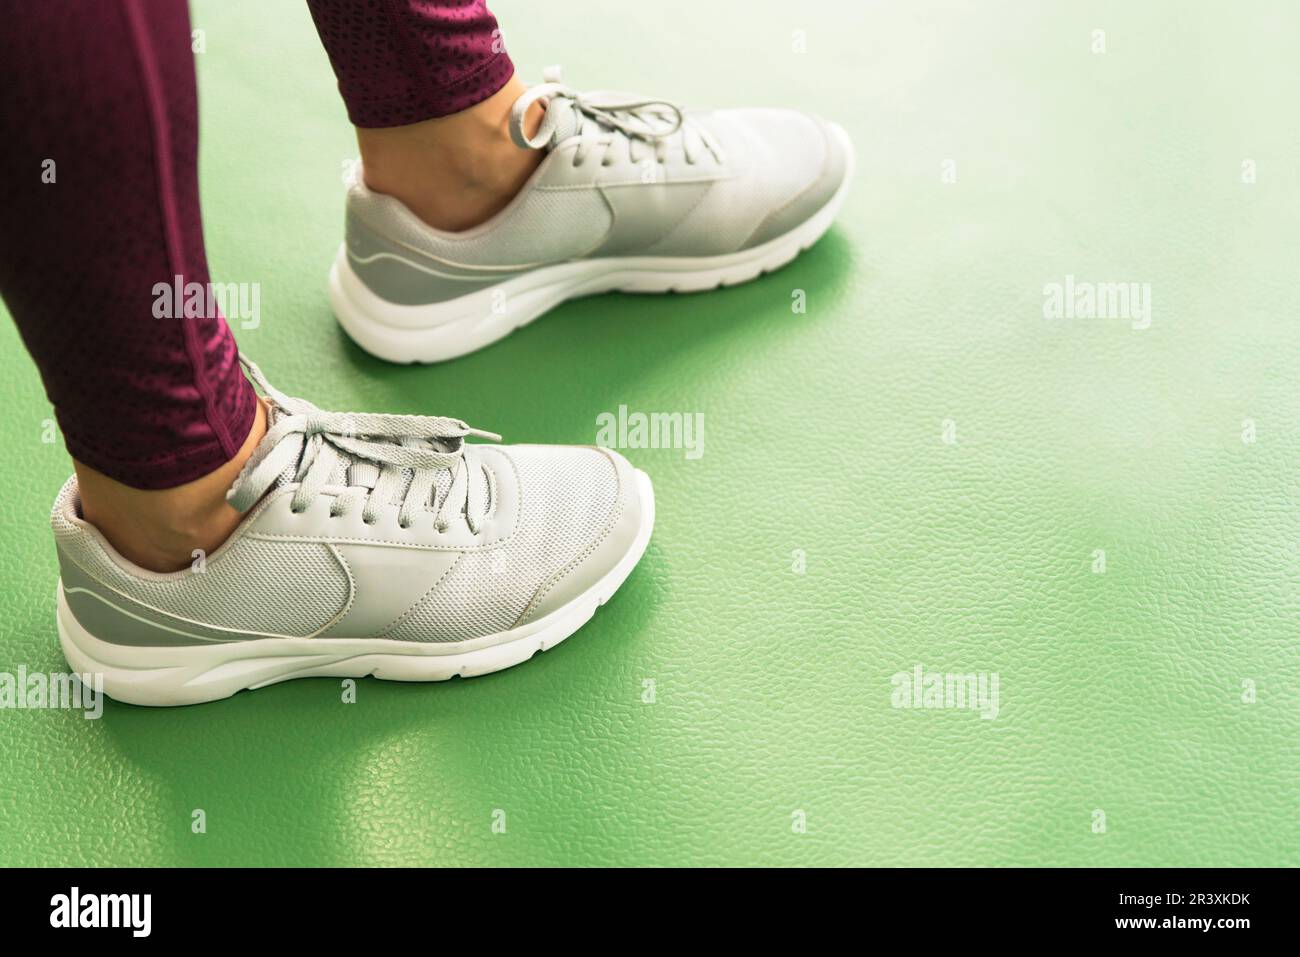 Close-up Fit Legs in Sportswear on a Blurred Background. Girls in Sneakers.  Runner Concept. Stock Photo - Image of action, legs: 101611970